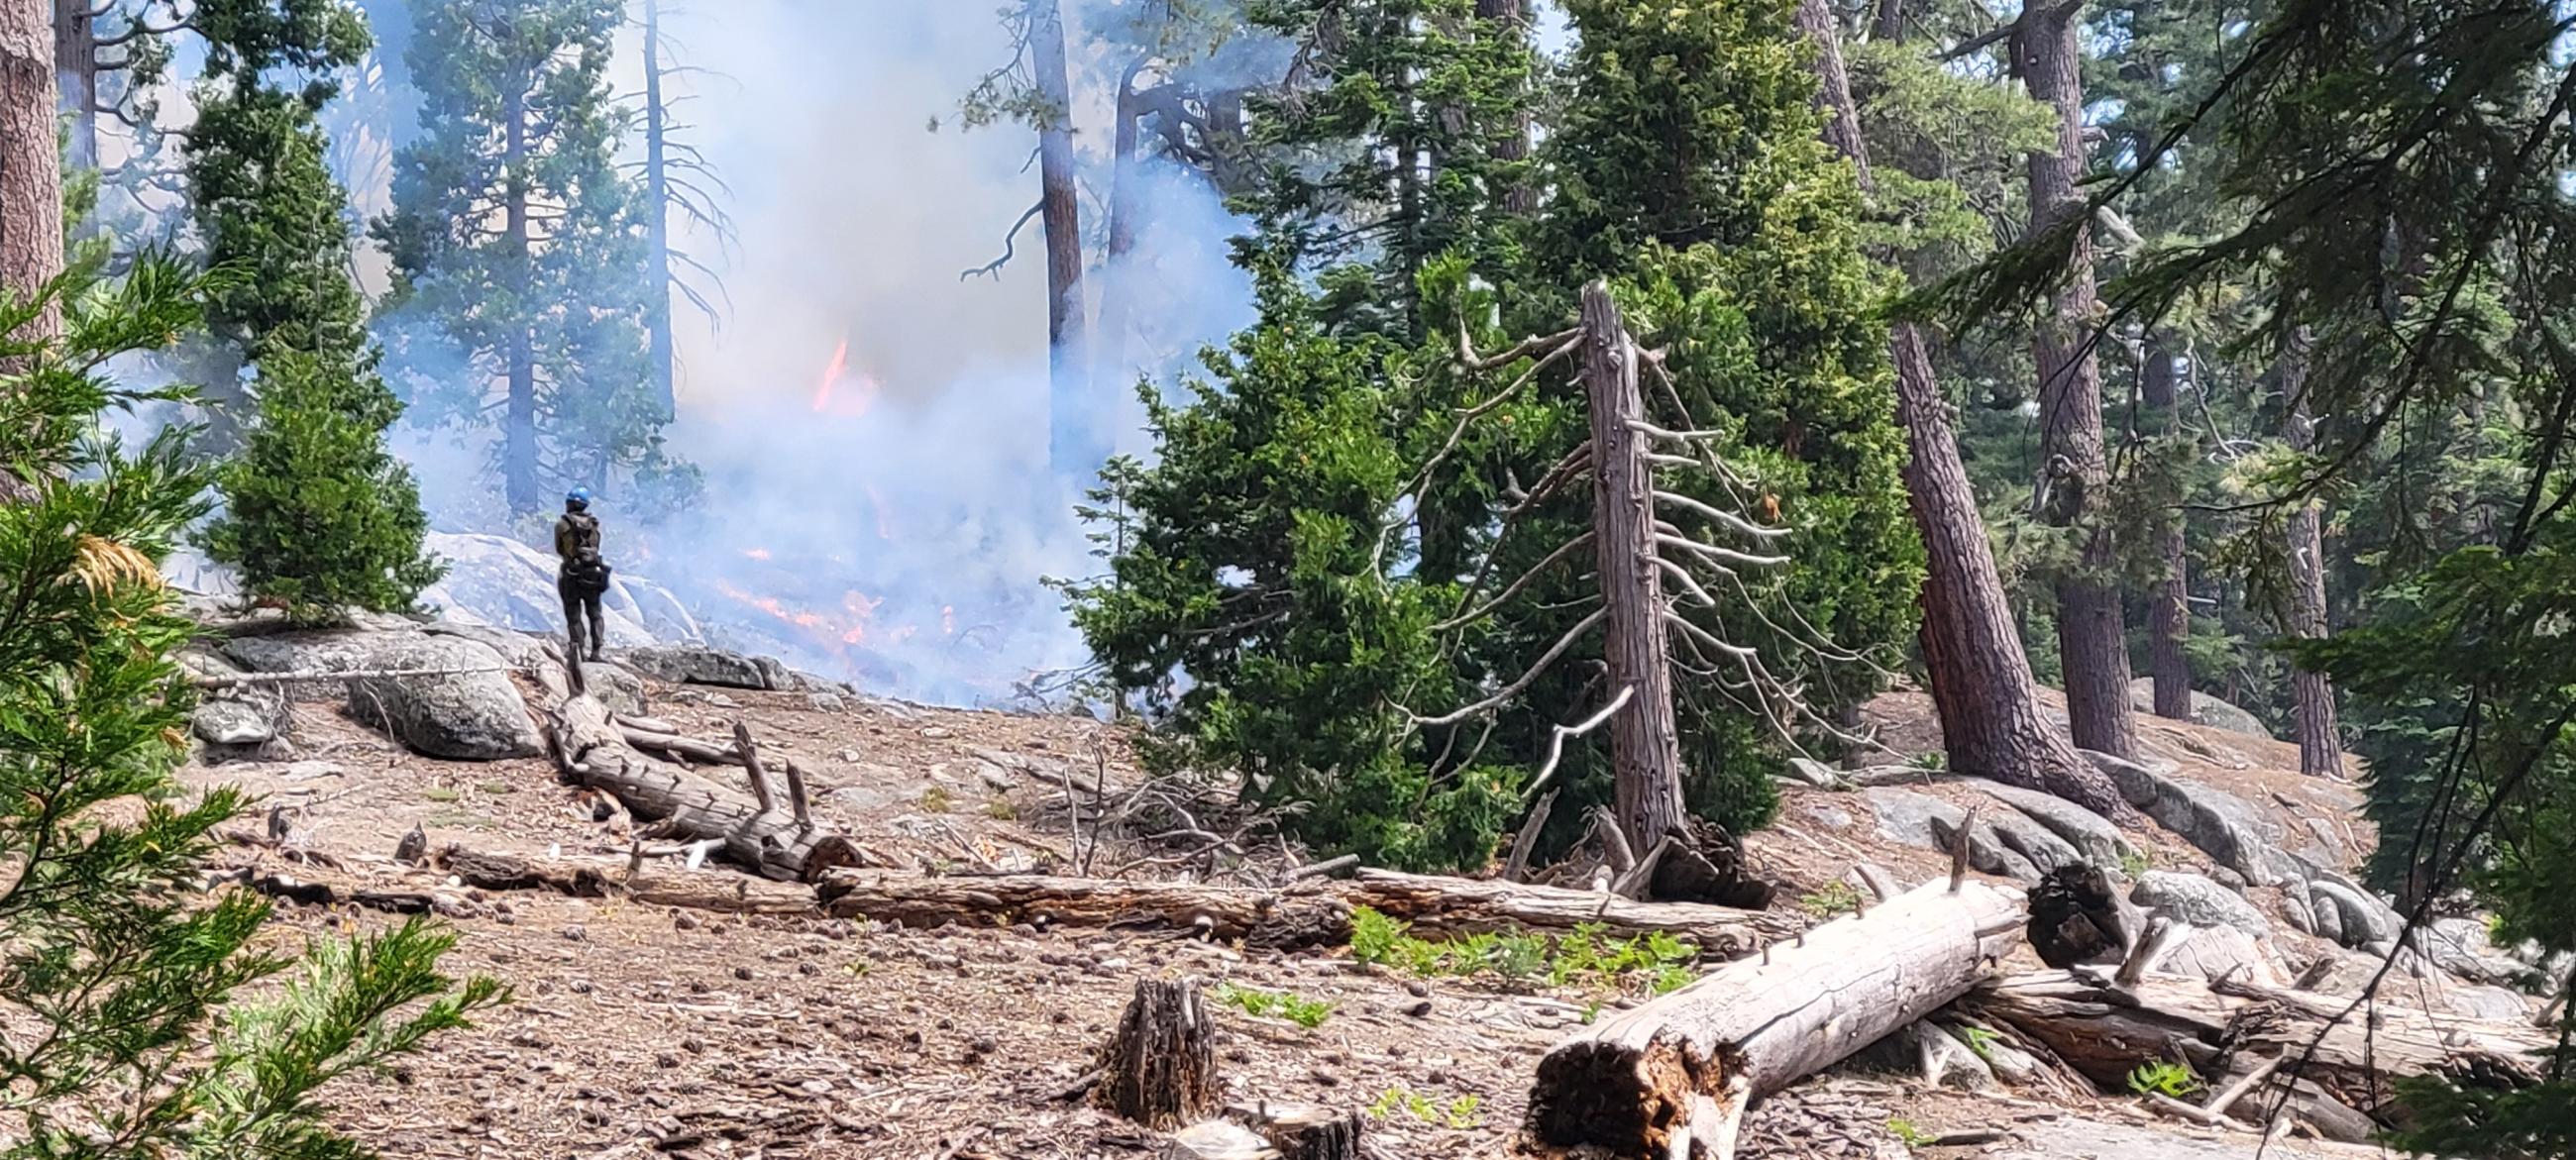 Photo of a forest with smoke and fire in the background. There is a firefighter watching the progress of the prescribed fire.  